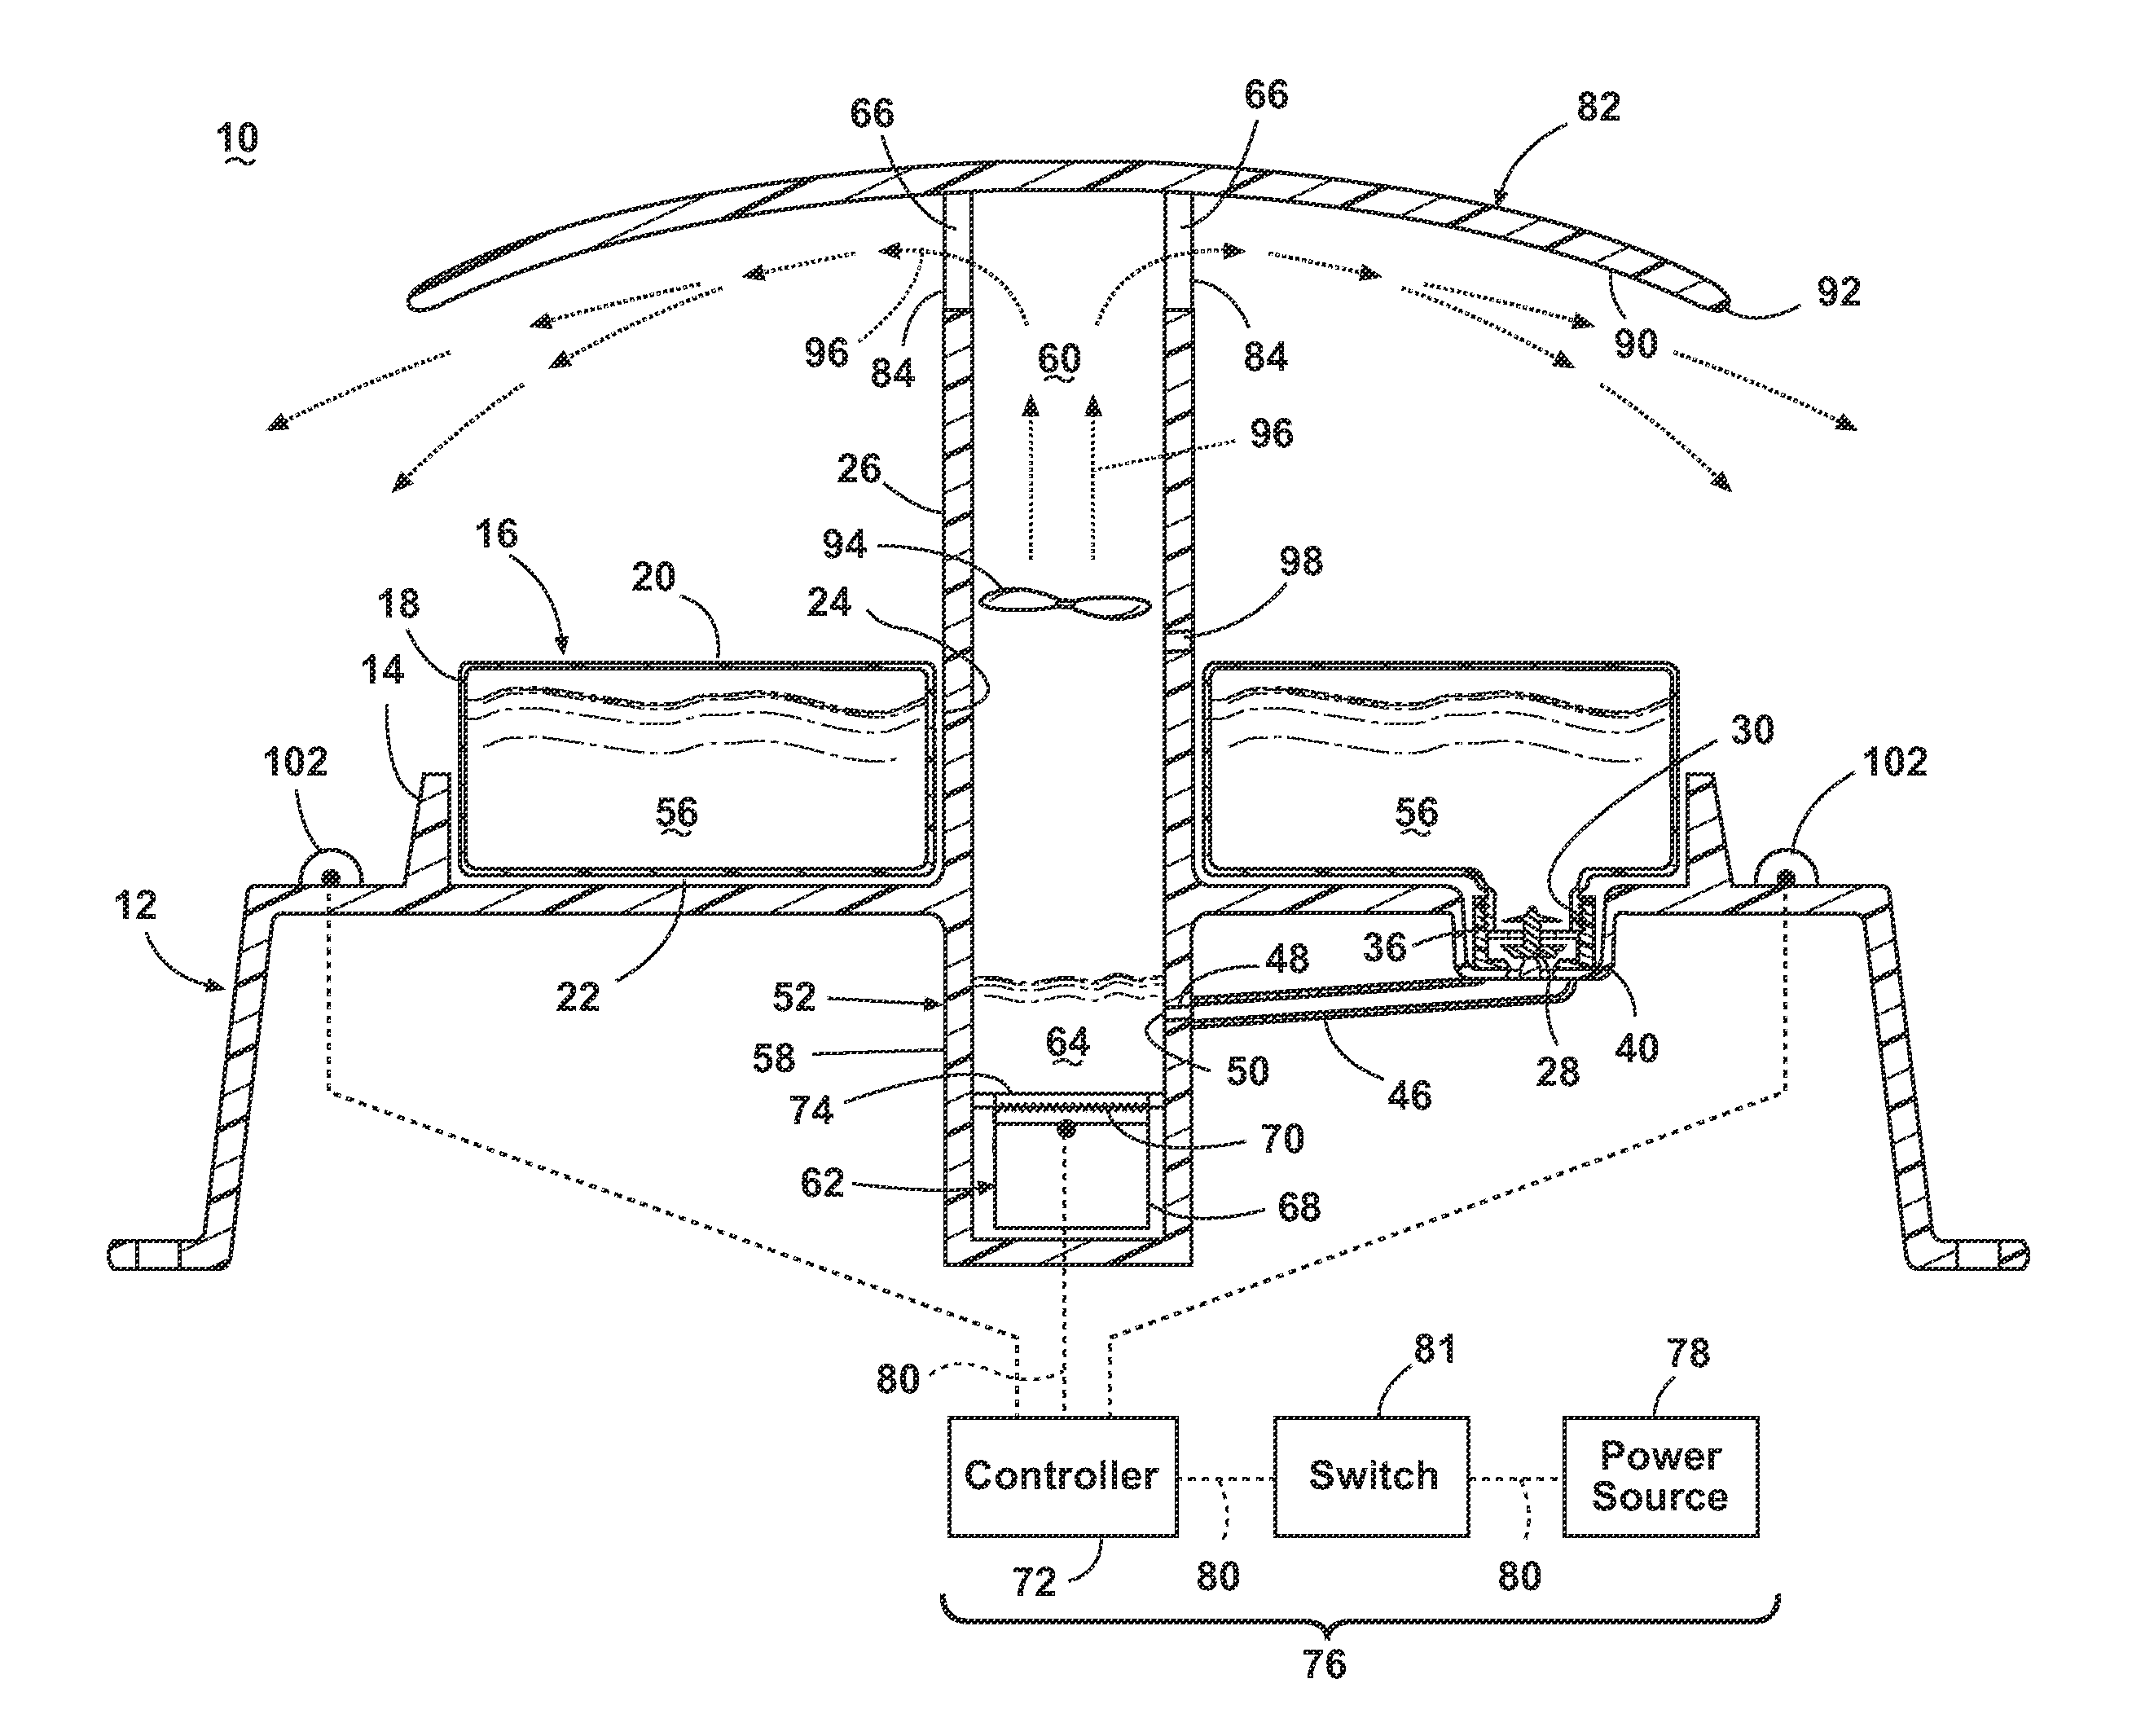 Cleaning implement with mist generating system